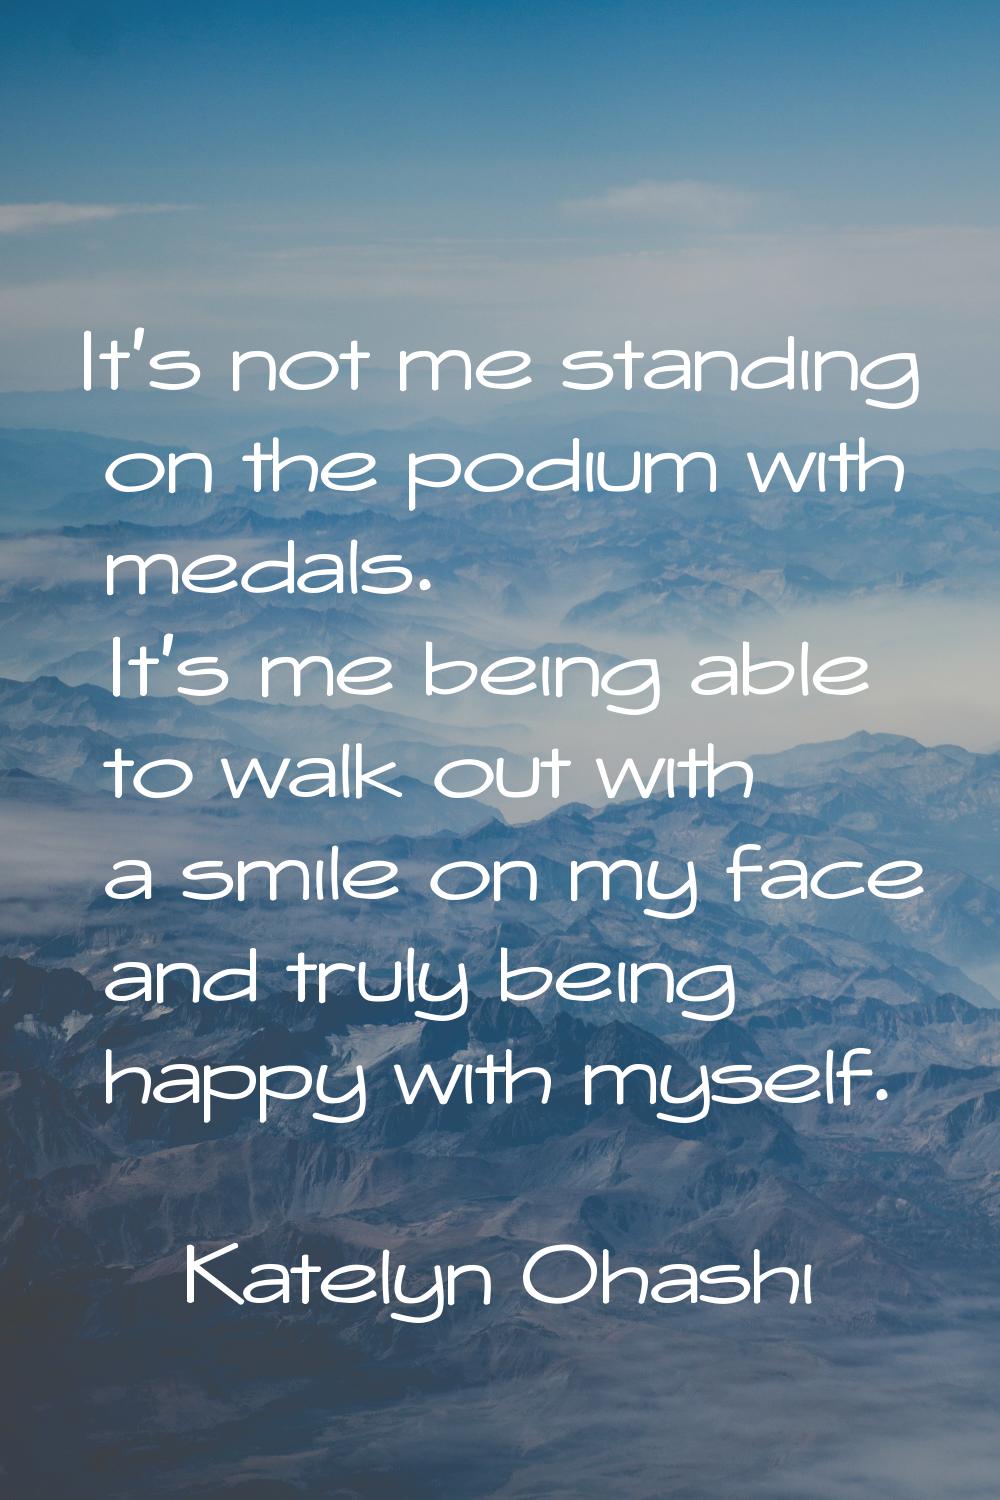 It's not me standing on the podium with medals. It's me being able to walk out with a smile on my f